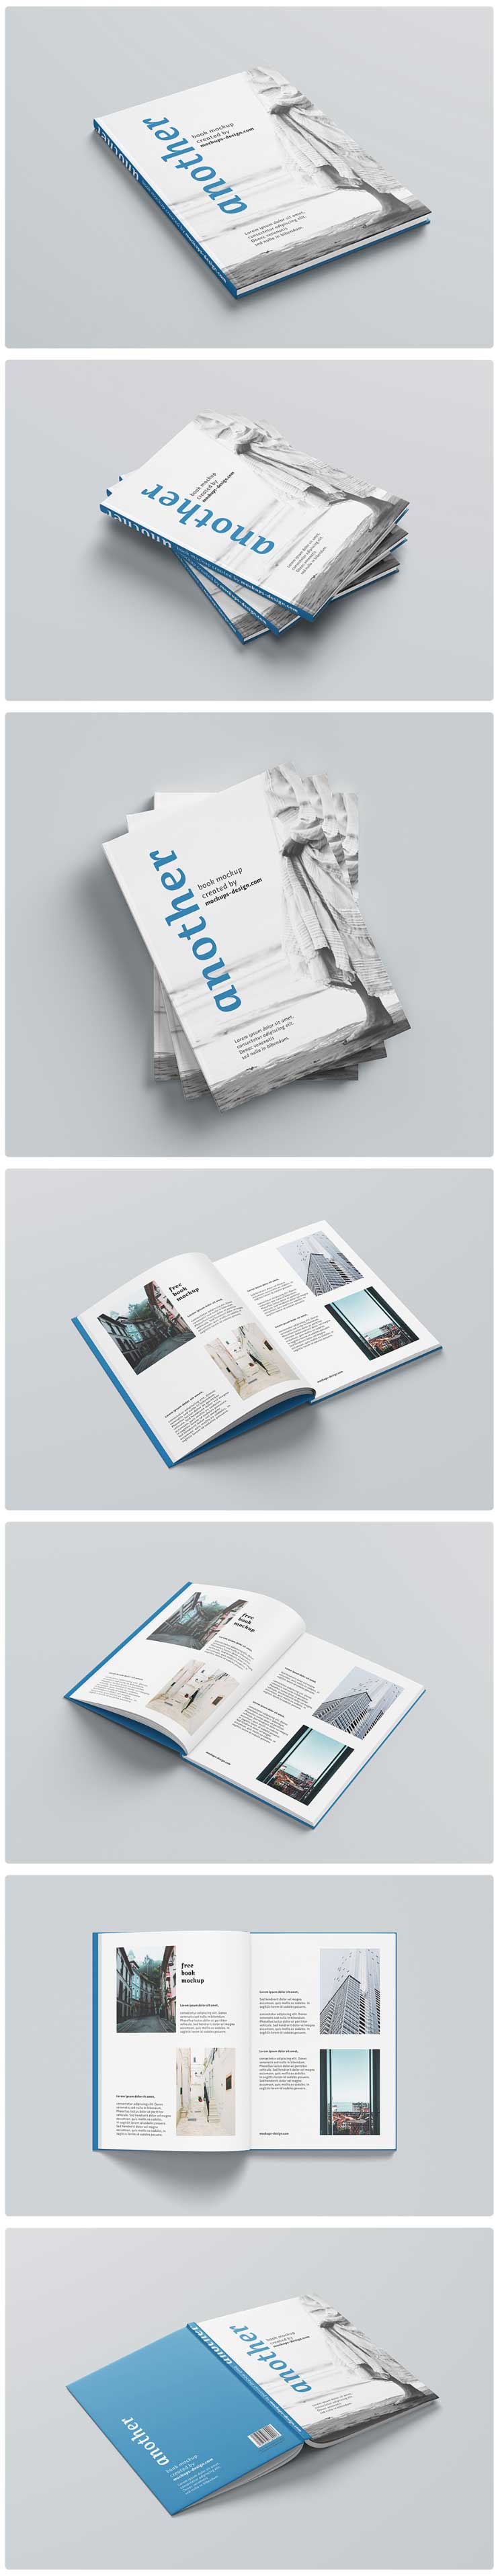 A4 Hardcover Book Free PSD Mockup